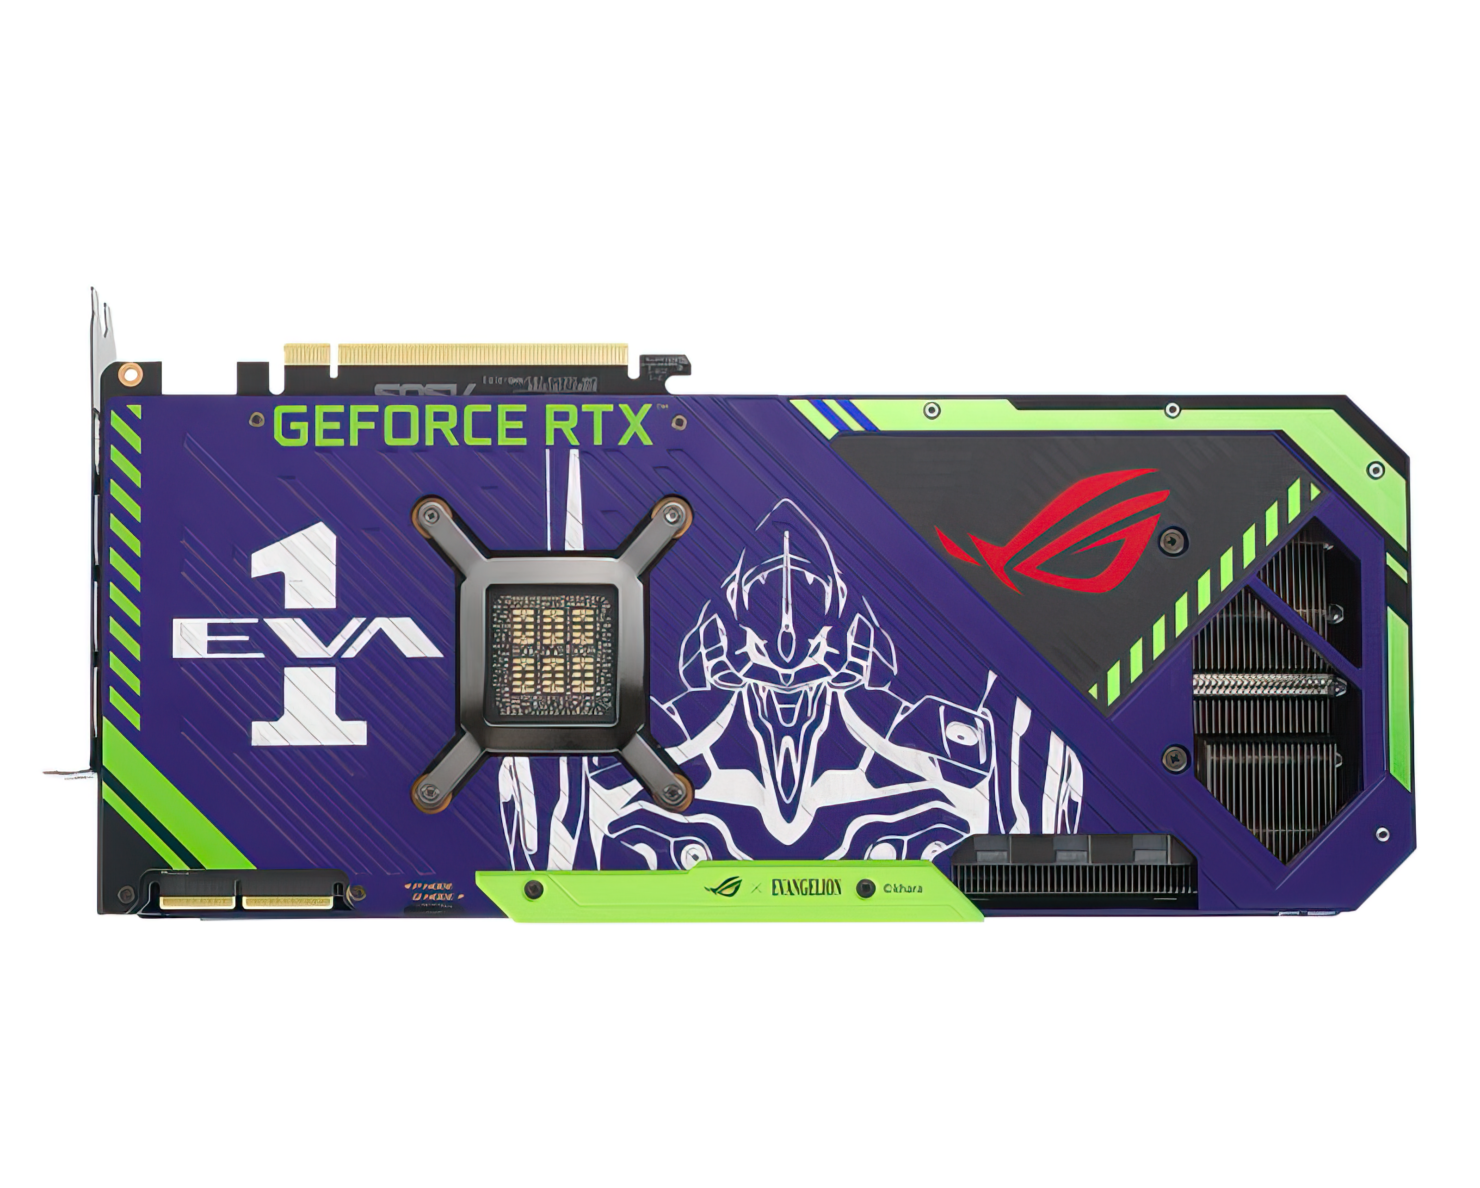 ASUS-ROG-Evangelion-Graphics-Card-EVA-01-ROG-RTX-3090-_3-low_res-scale-4_00x-1480x1188.png